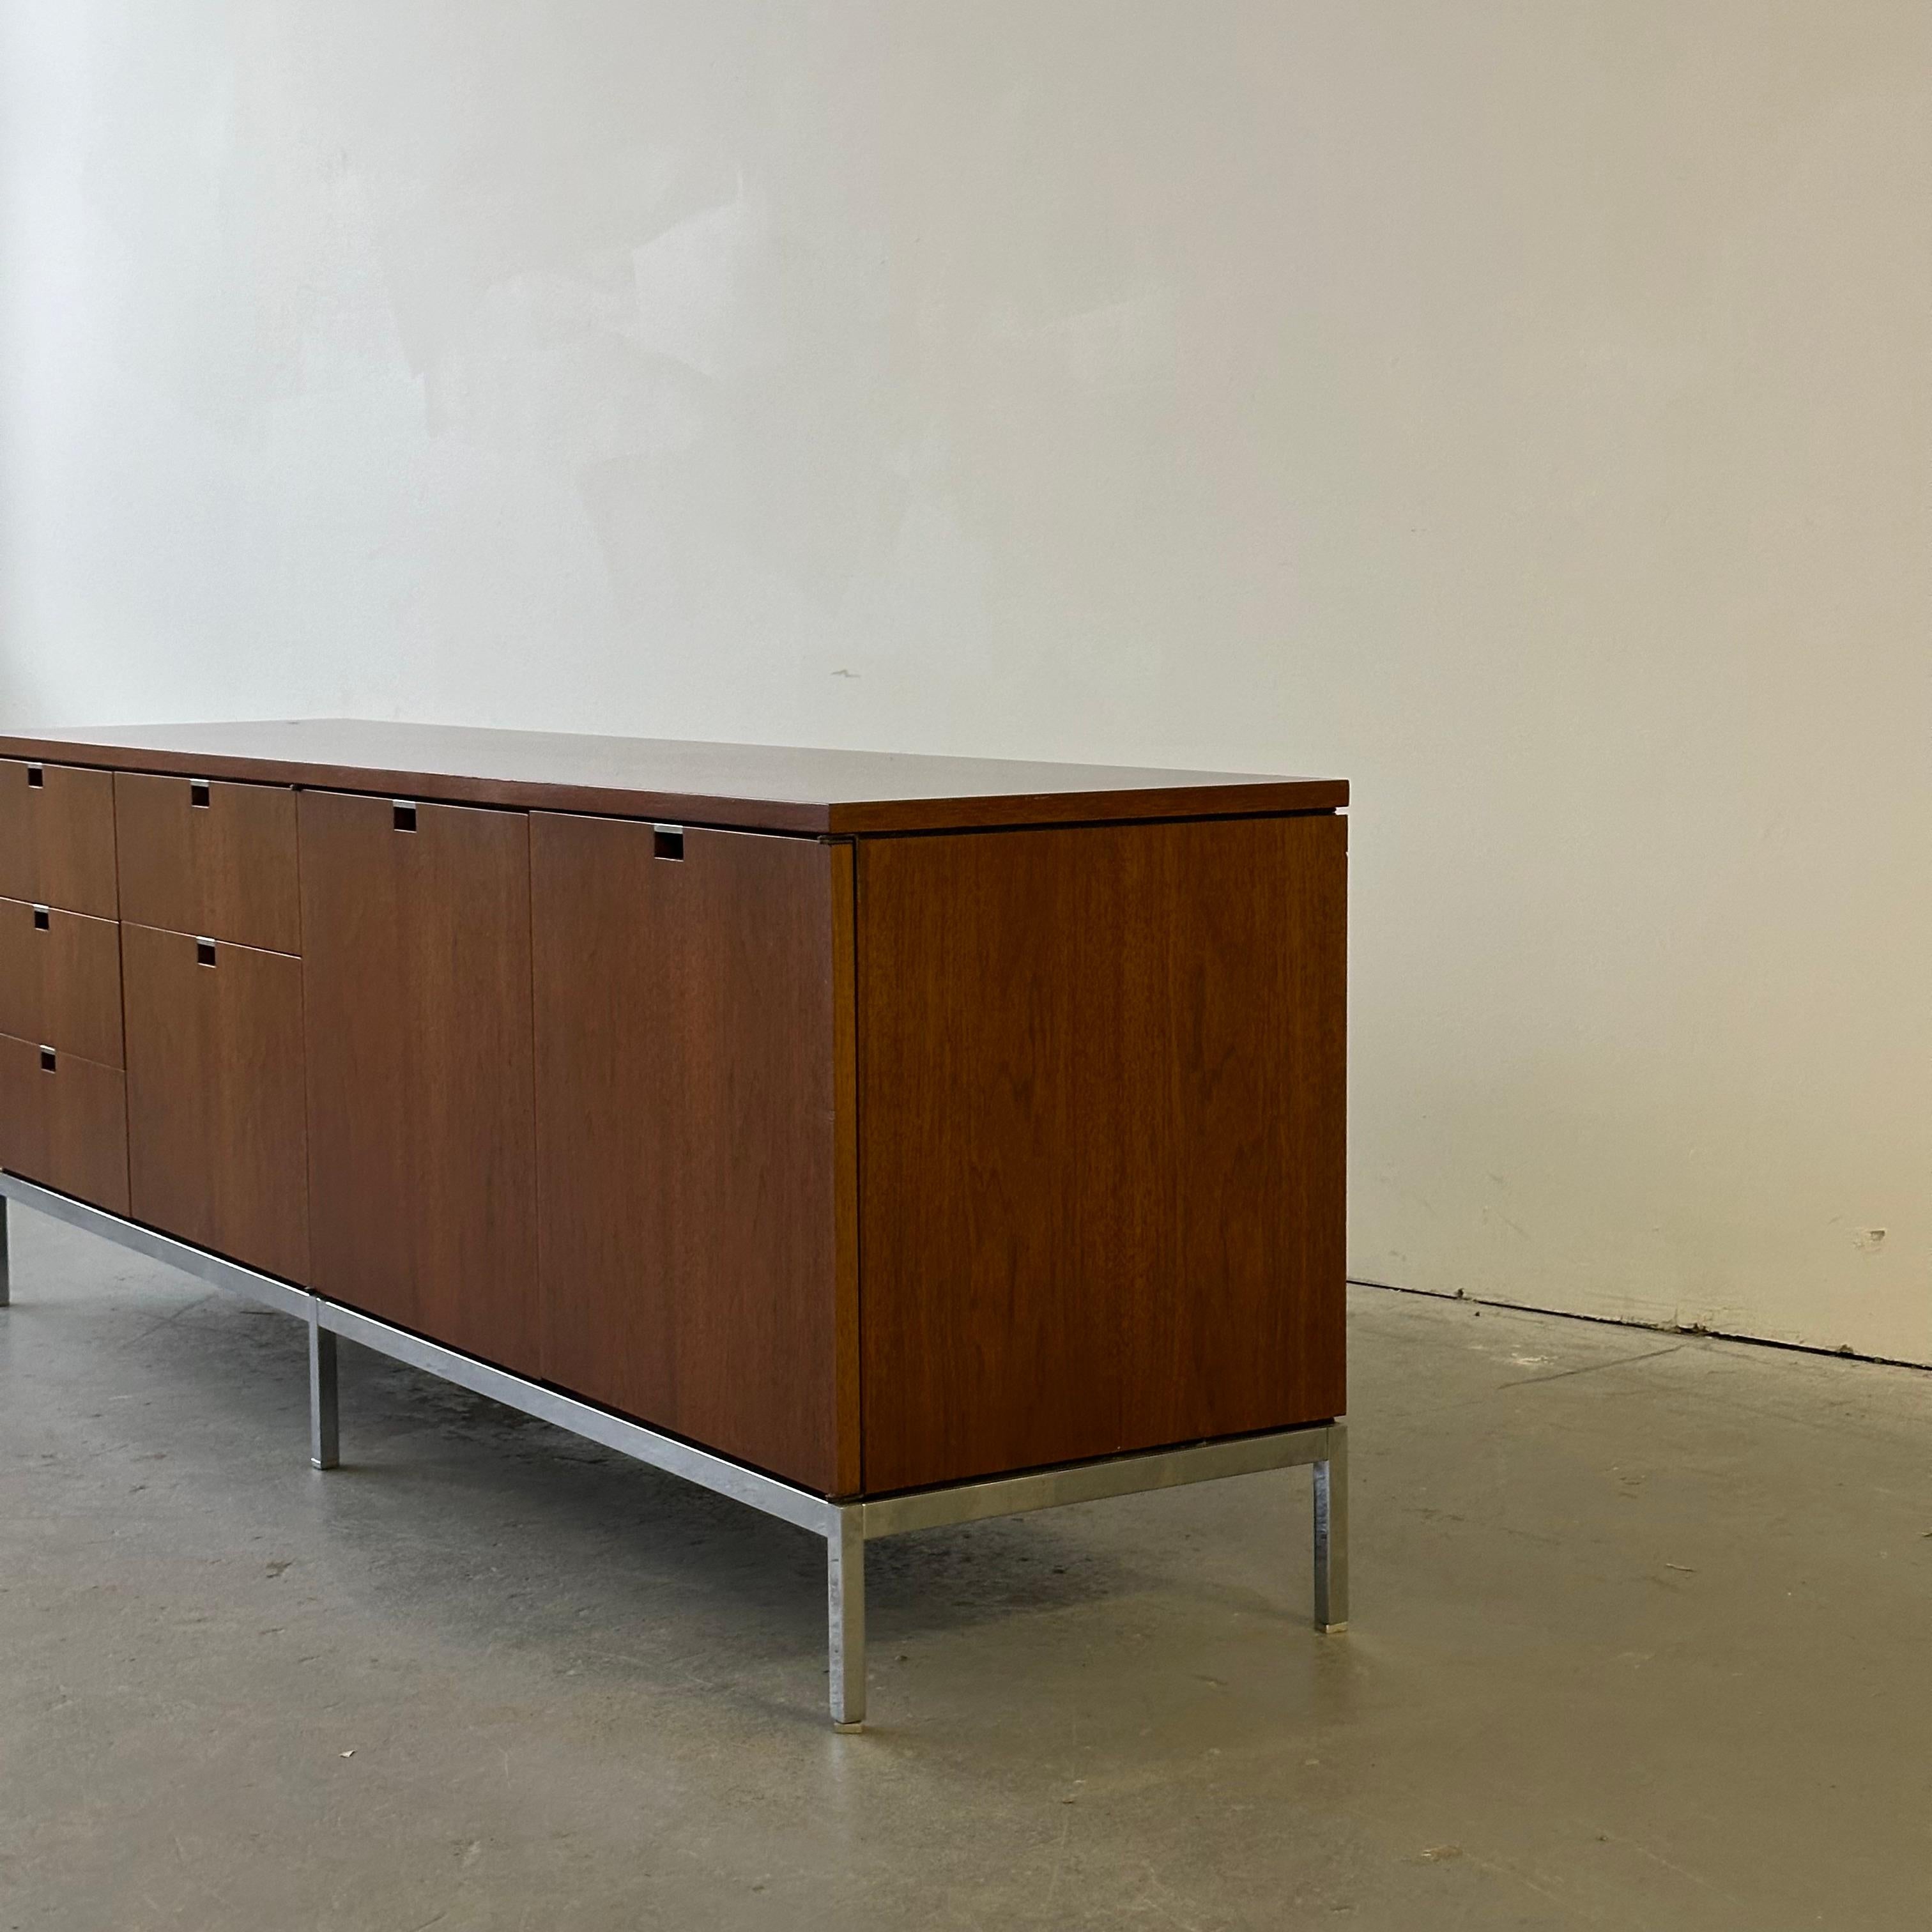 American Florence Knoll Credenza